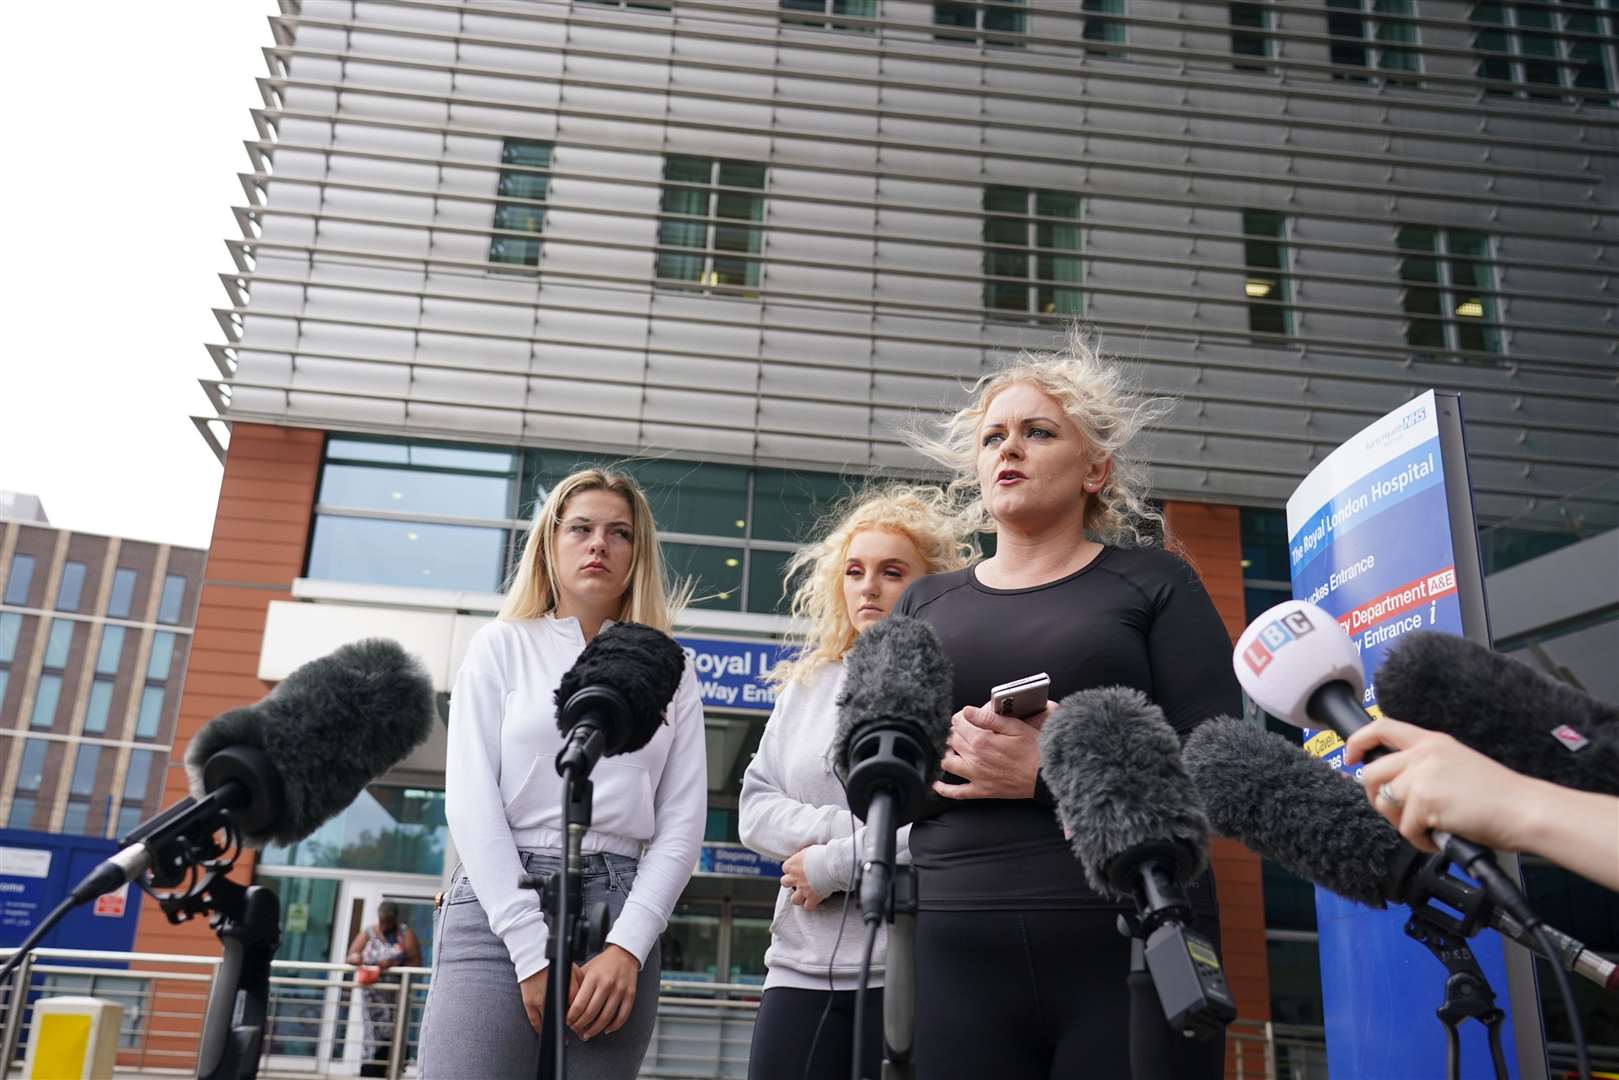 Archie Battersbee’s mother, Hollie Dance (right) speaks to the media outside the Royal London Hospital in Whitechapel, east London (Dominic Lipinski/PA)